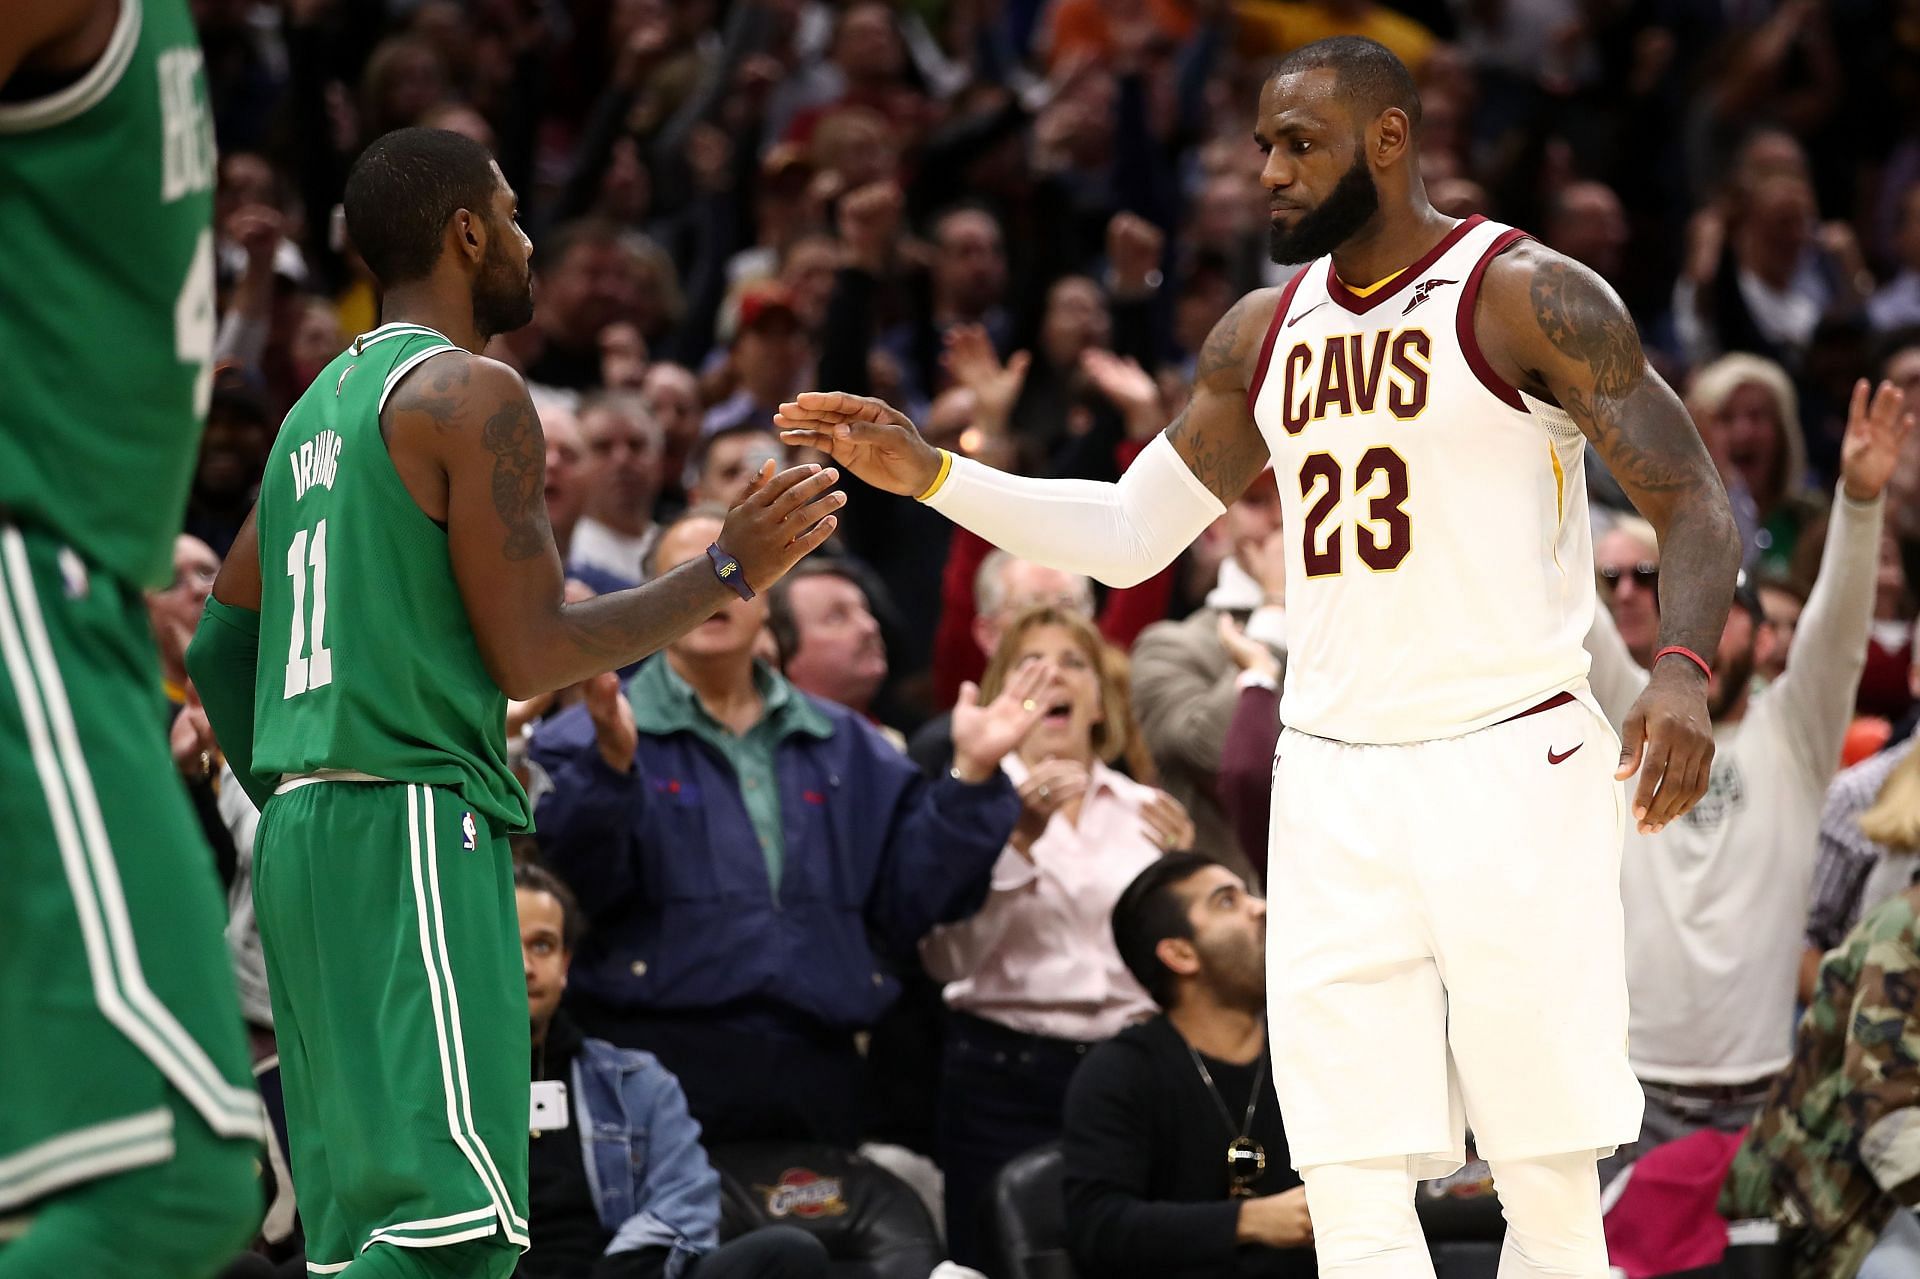 Boston Celtics guard Kyrie Irving, left, and Cleveland Cavaliers forward LeBron James. Irving is now with the Brooklyn Nets, and James is now with the LA Lakers.